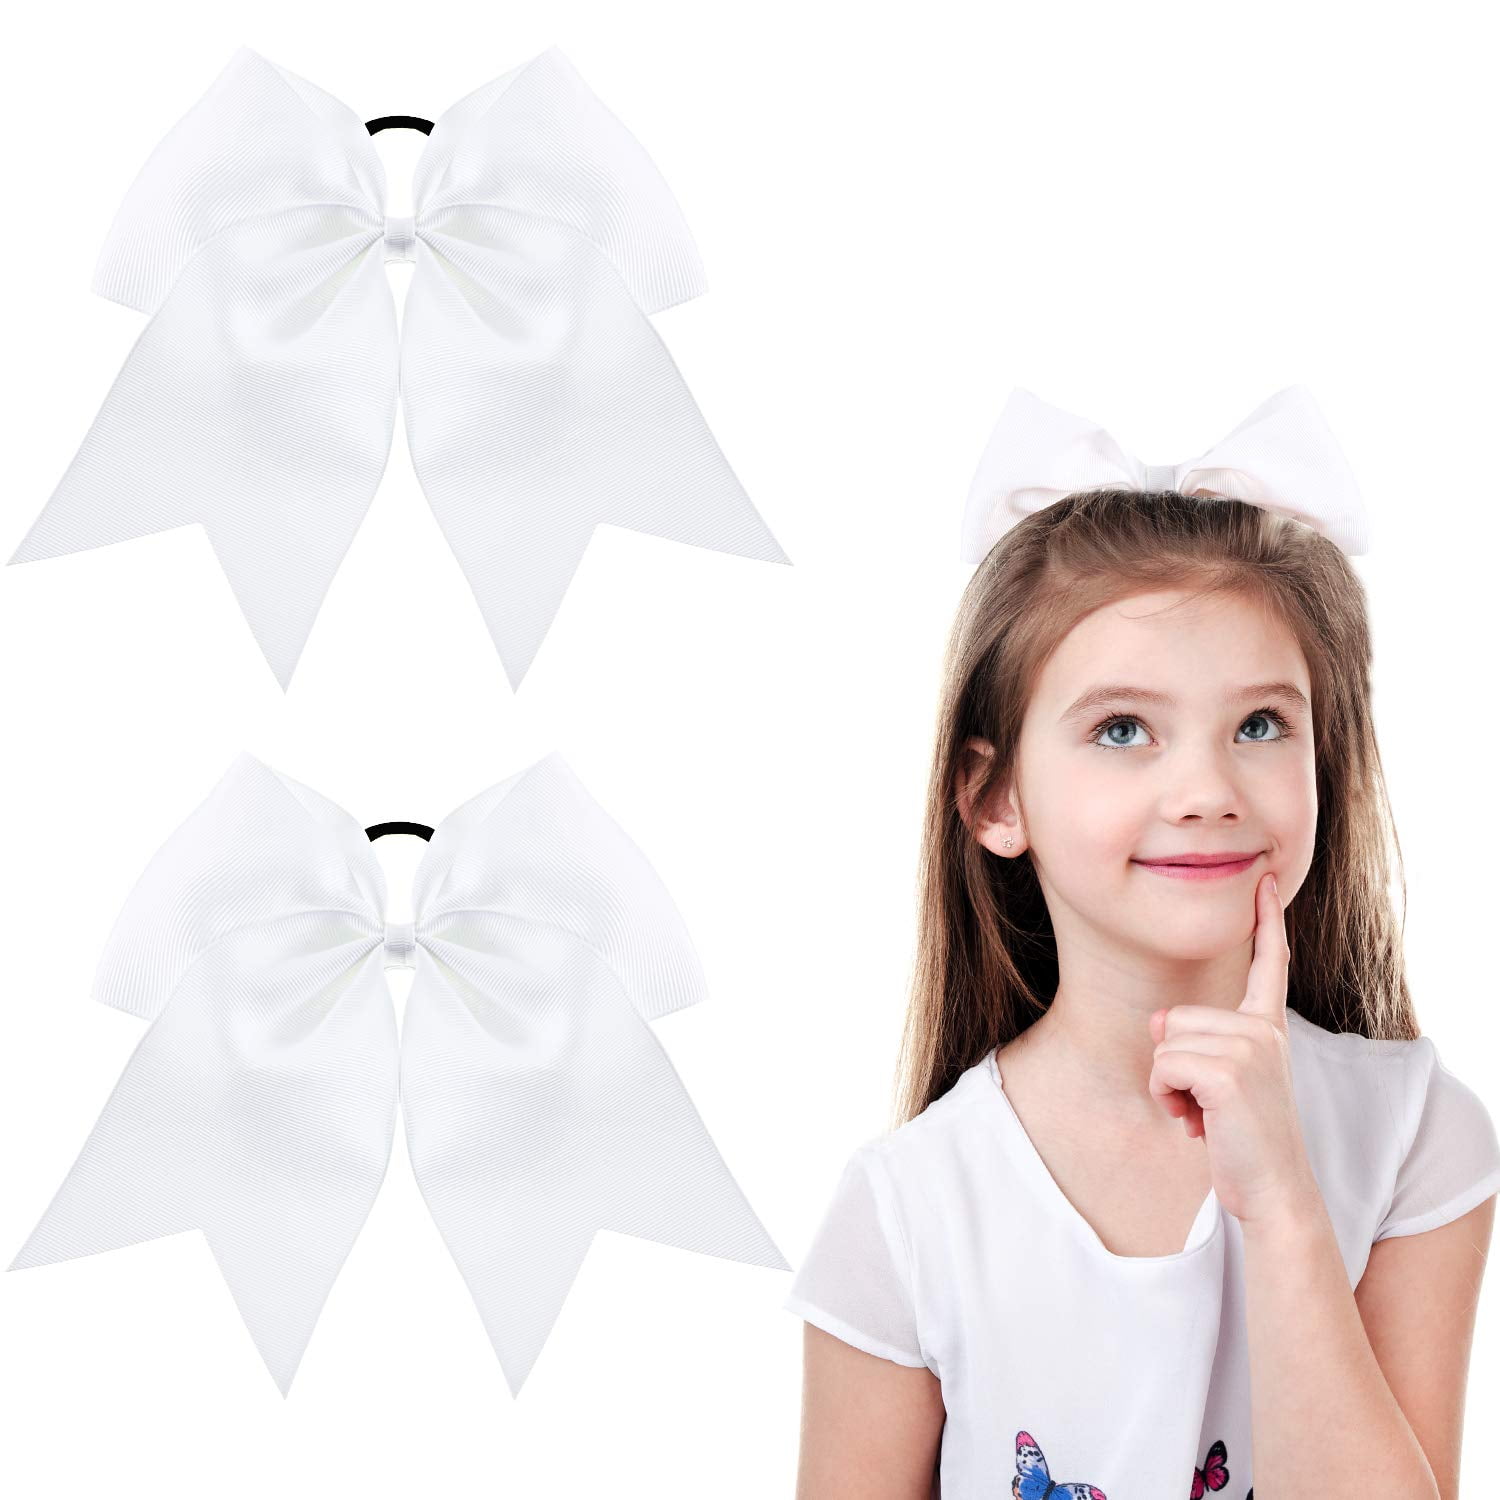 50 Cheer Bows Large 7" Ribbon with Holders for Girls Cheerleading Hair Bow Cheap 